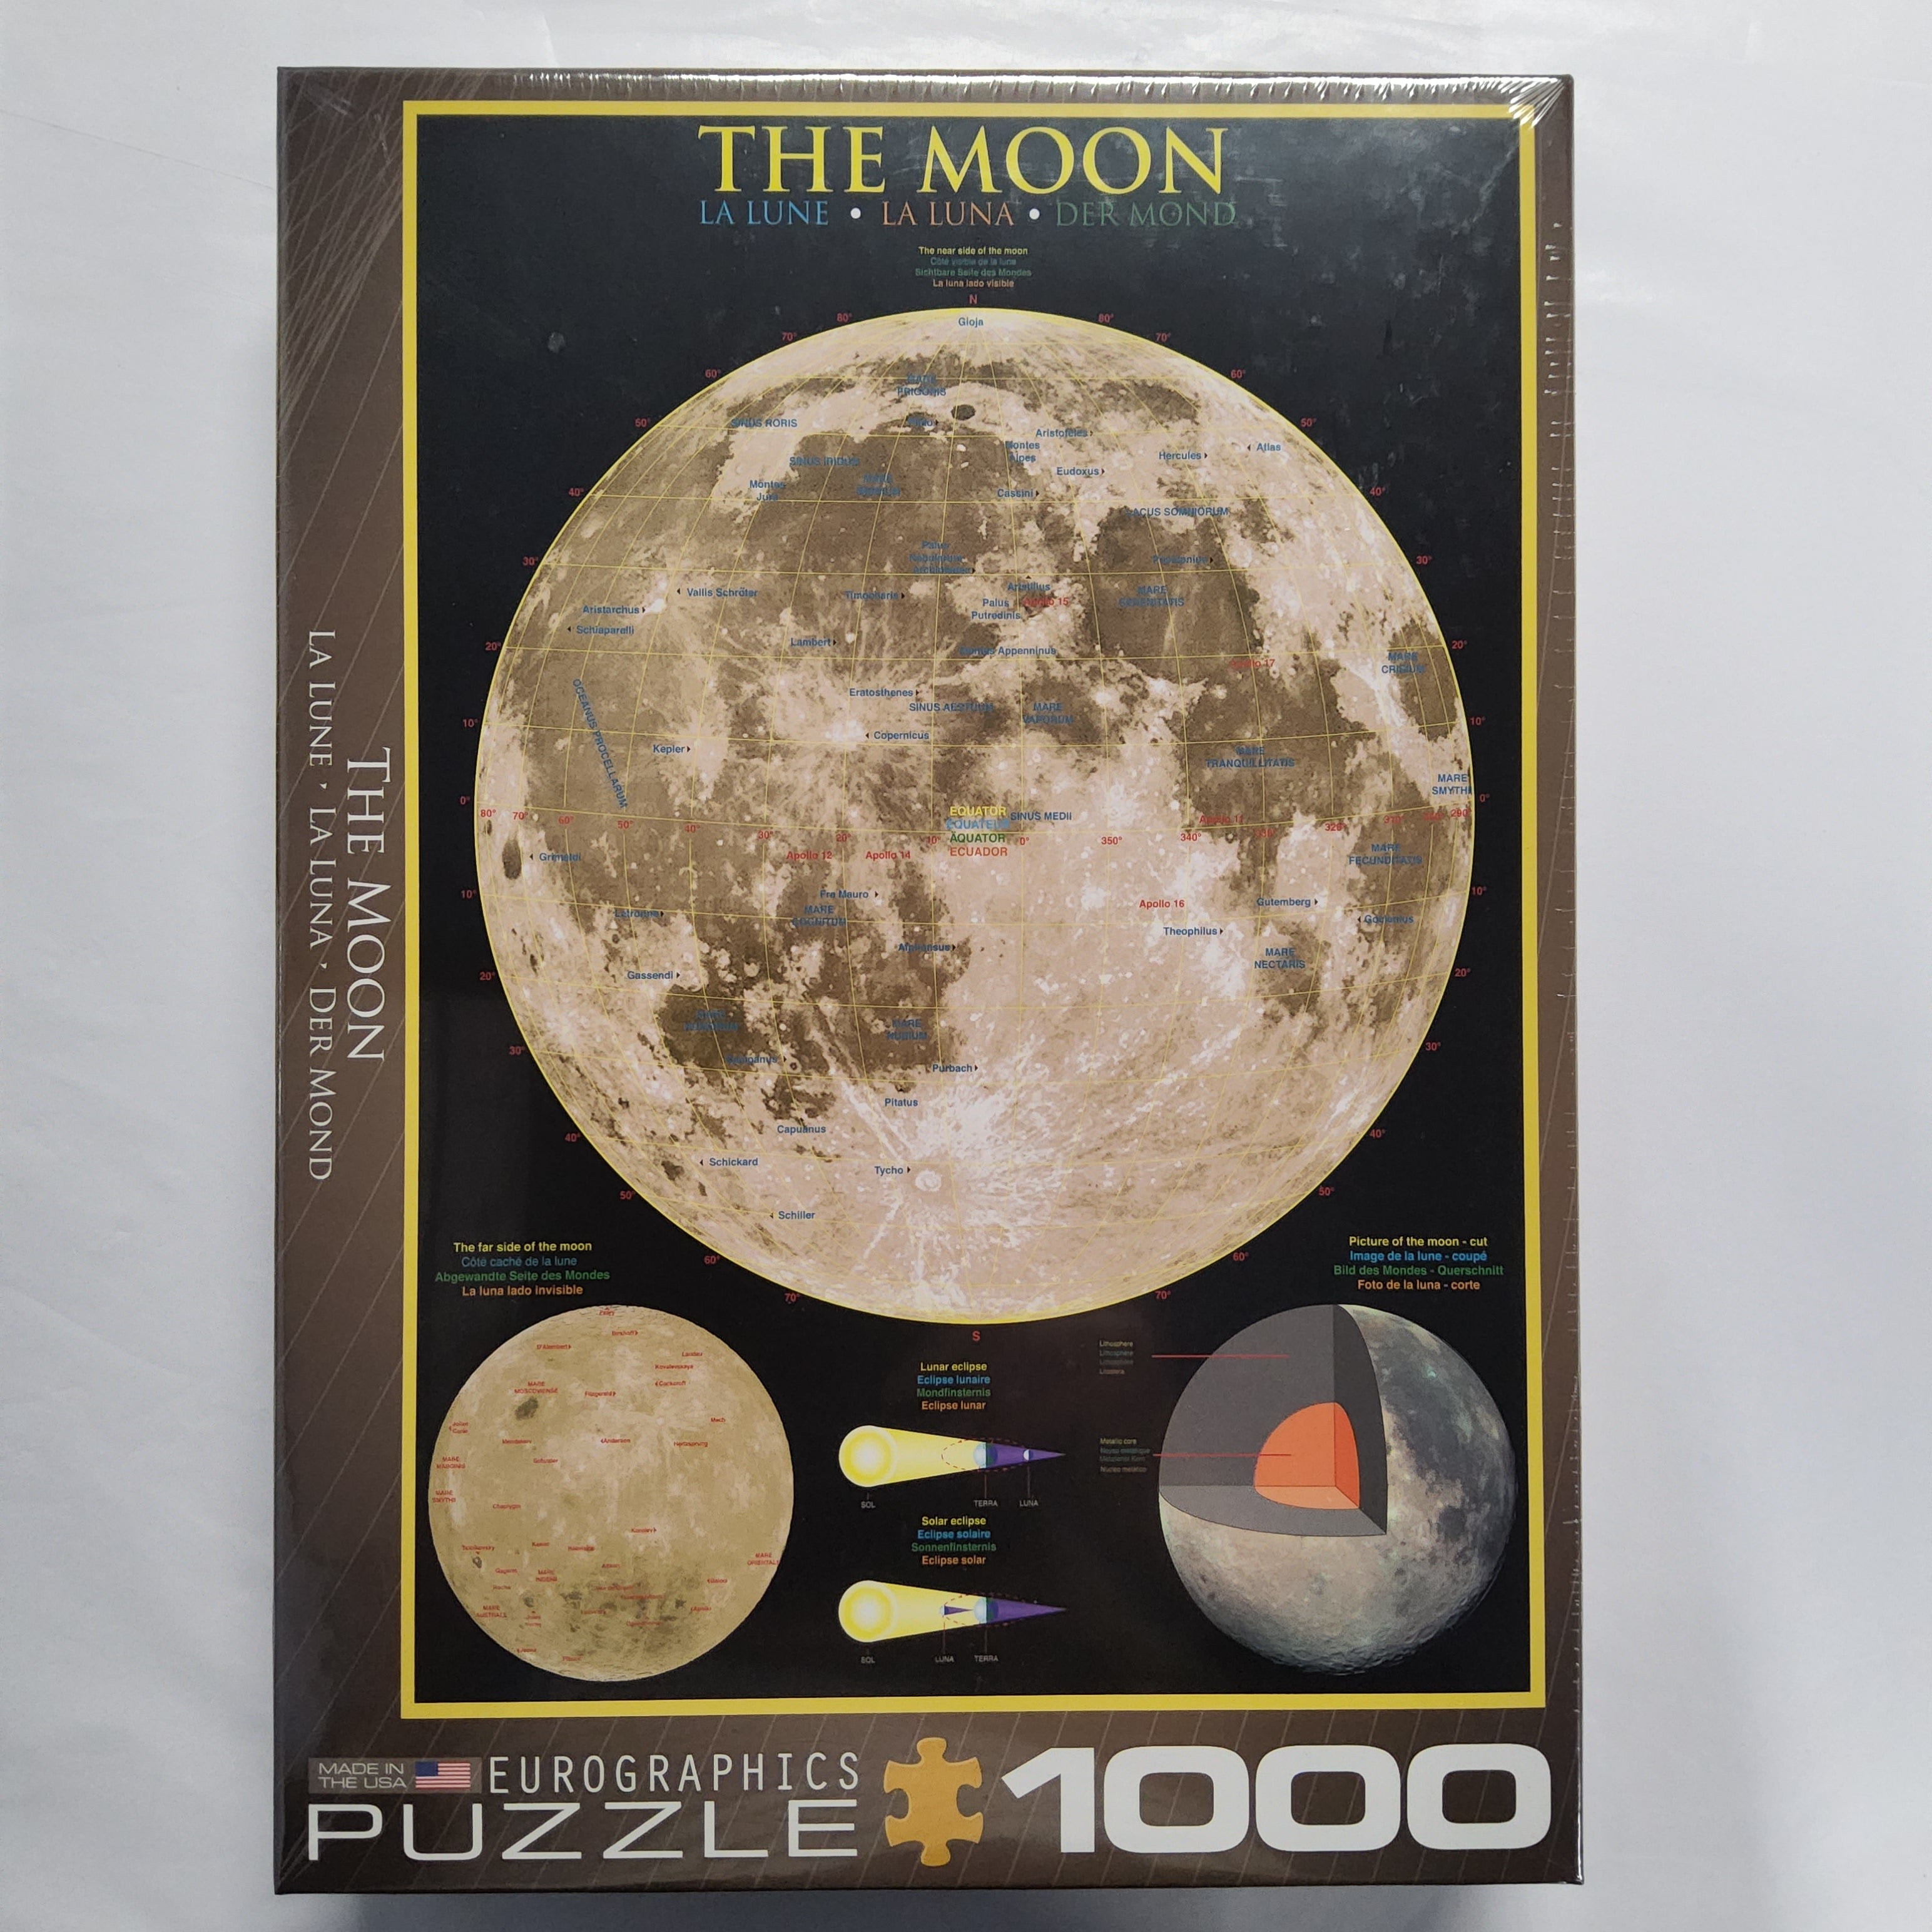 Eurographics Puzzle - The Moon - 1000 pieces - 6000-1007